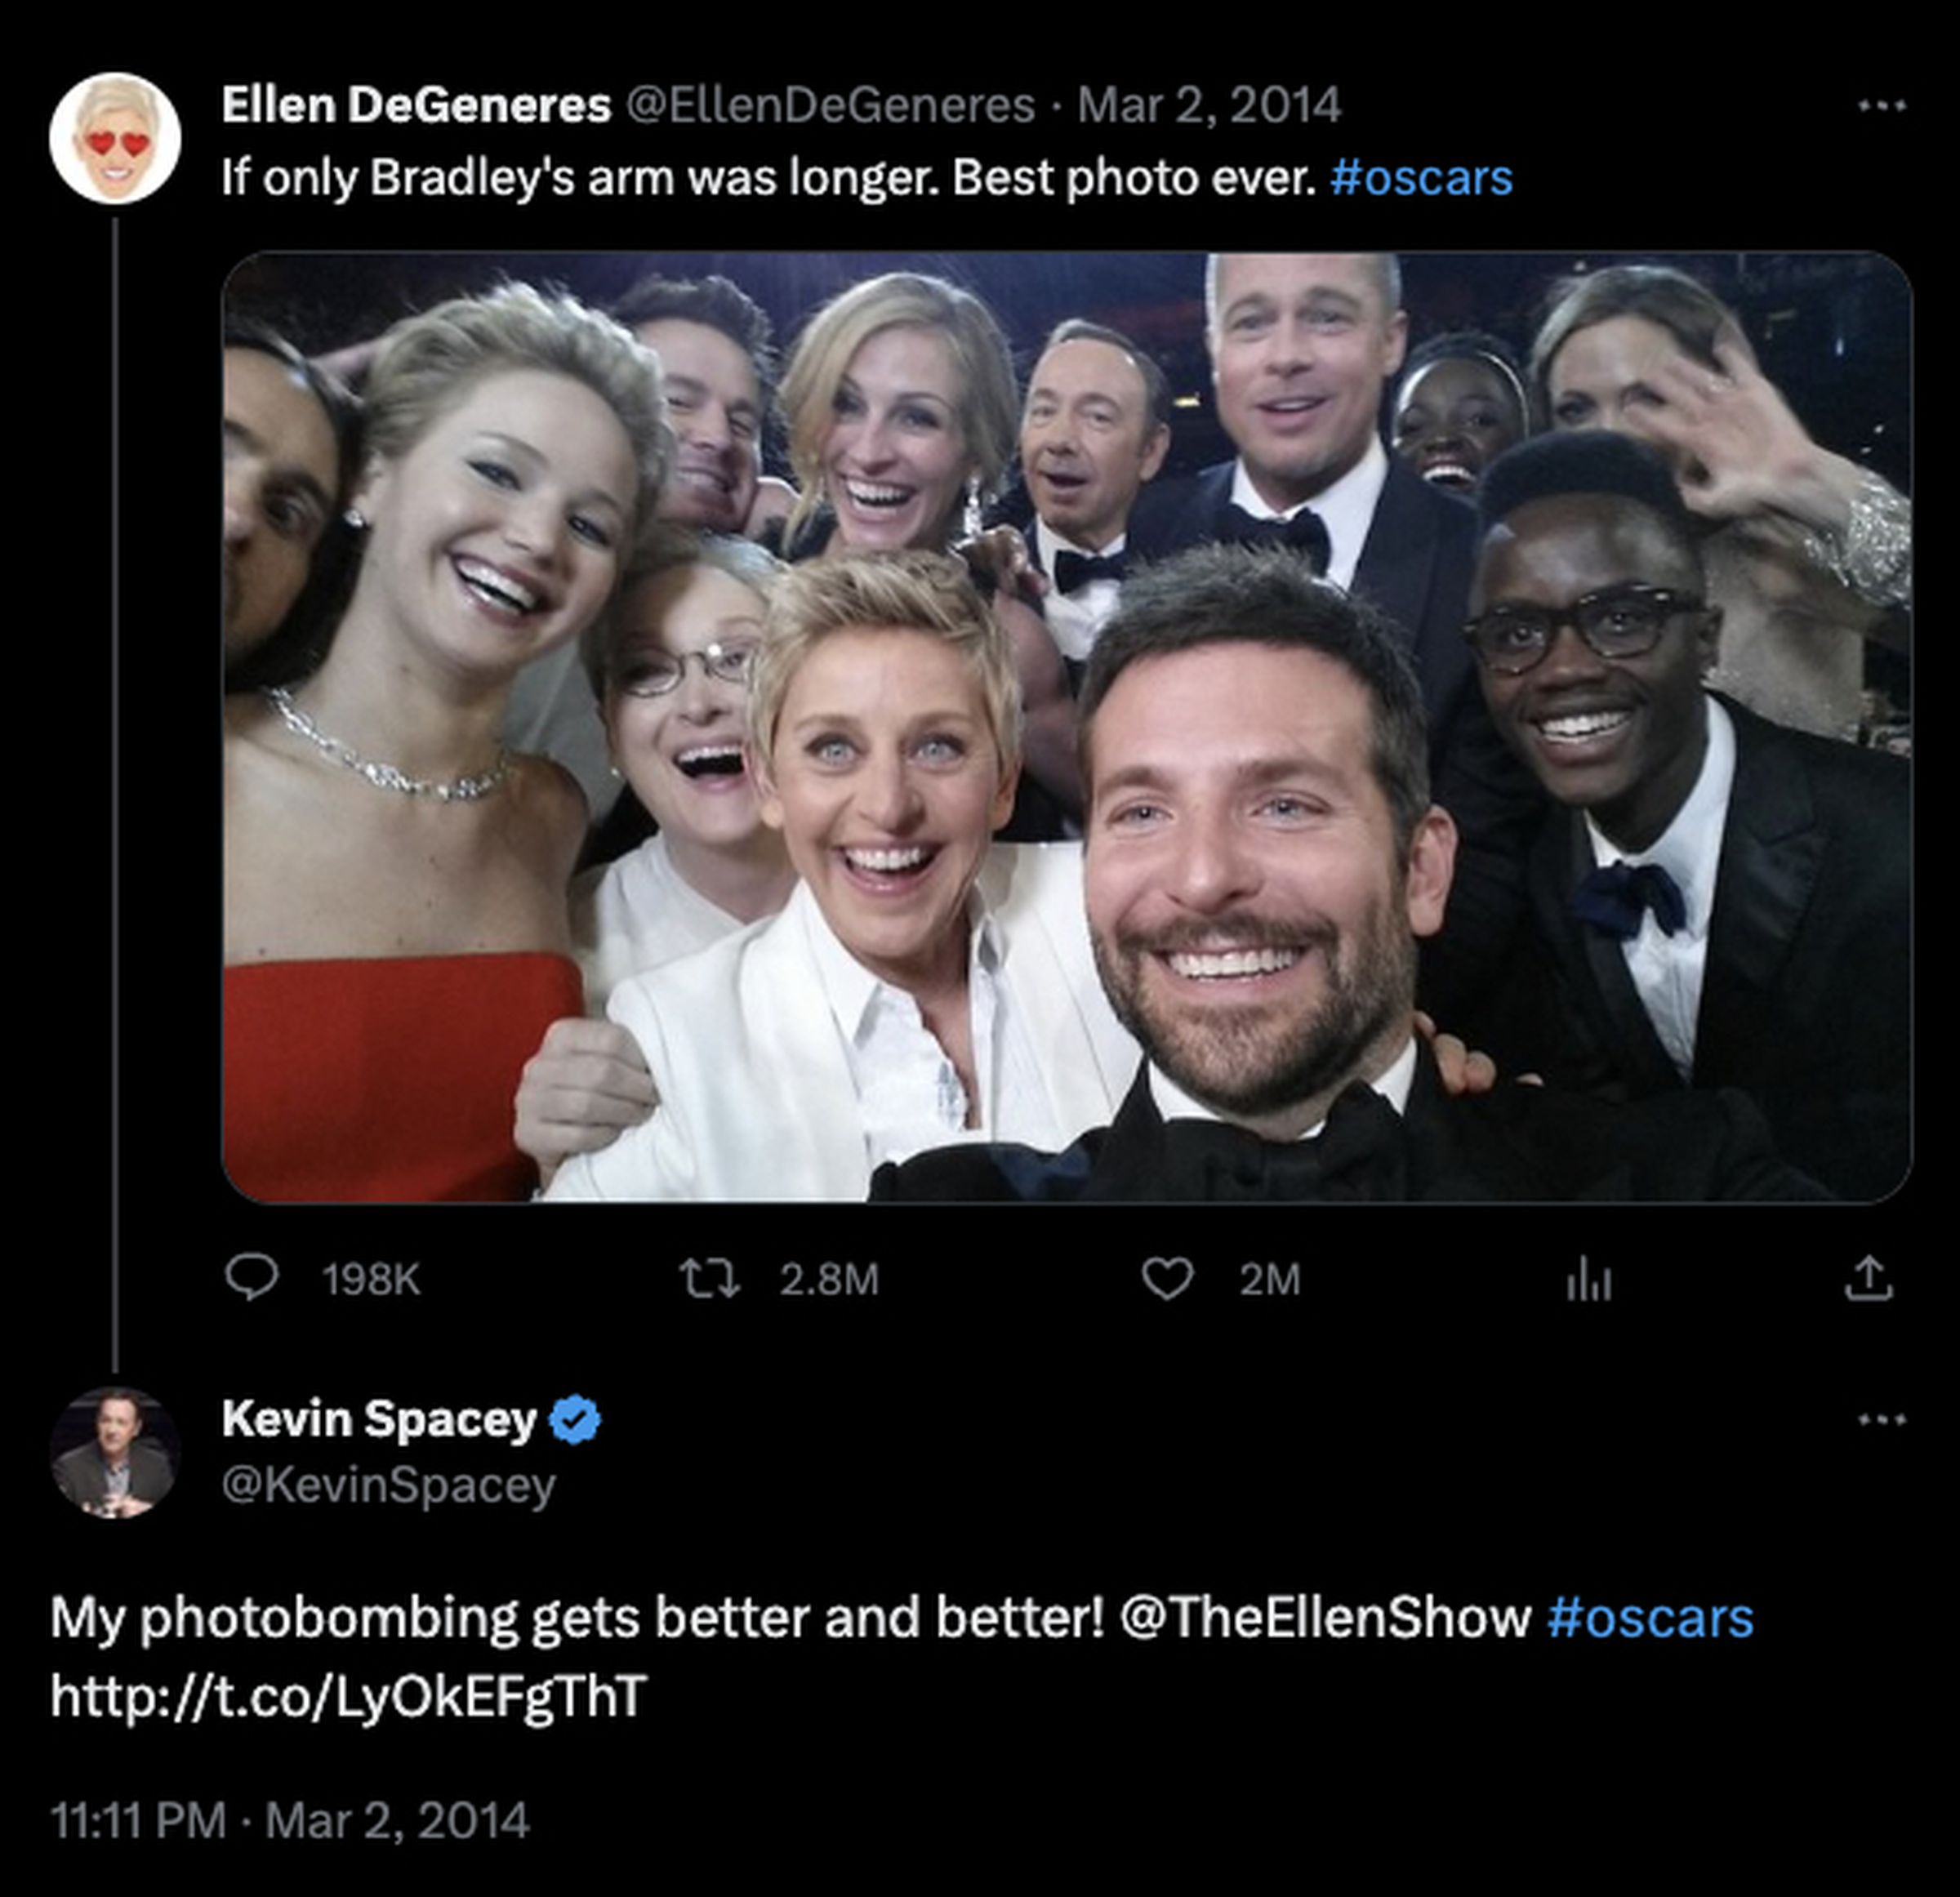 Screenshot of a famous tweet by Ellen DeGeneres taken during the 2014 Academy Awards ceremony in the crowd with various celebrities, along with a reply from Kevin Spacey, showing a broken link instead of an image.